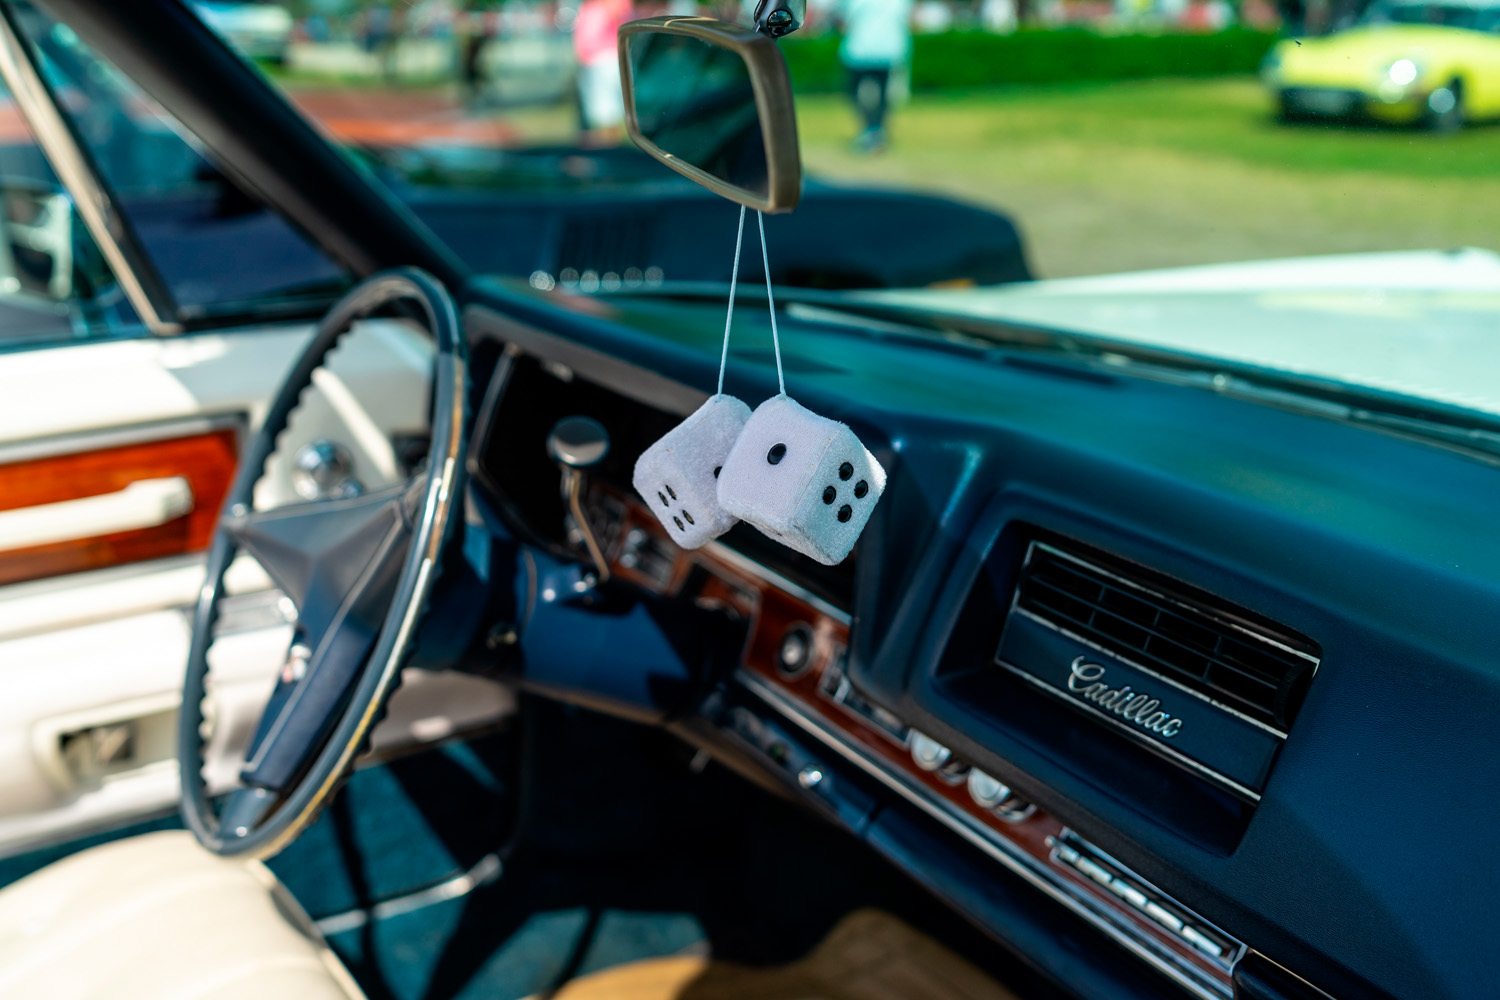 PAAREN IM GLIEN, GERMANY - MAY 19, 2018: Decoration in the cabin of a full-size luxury car Cadillac de Ville convertible (third generation), 1968. Focus on the foreground.